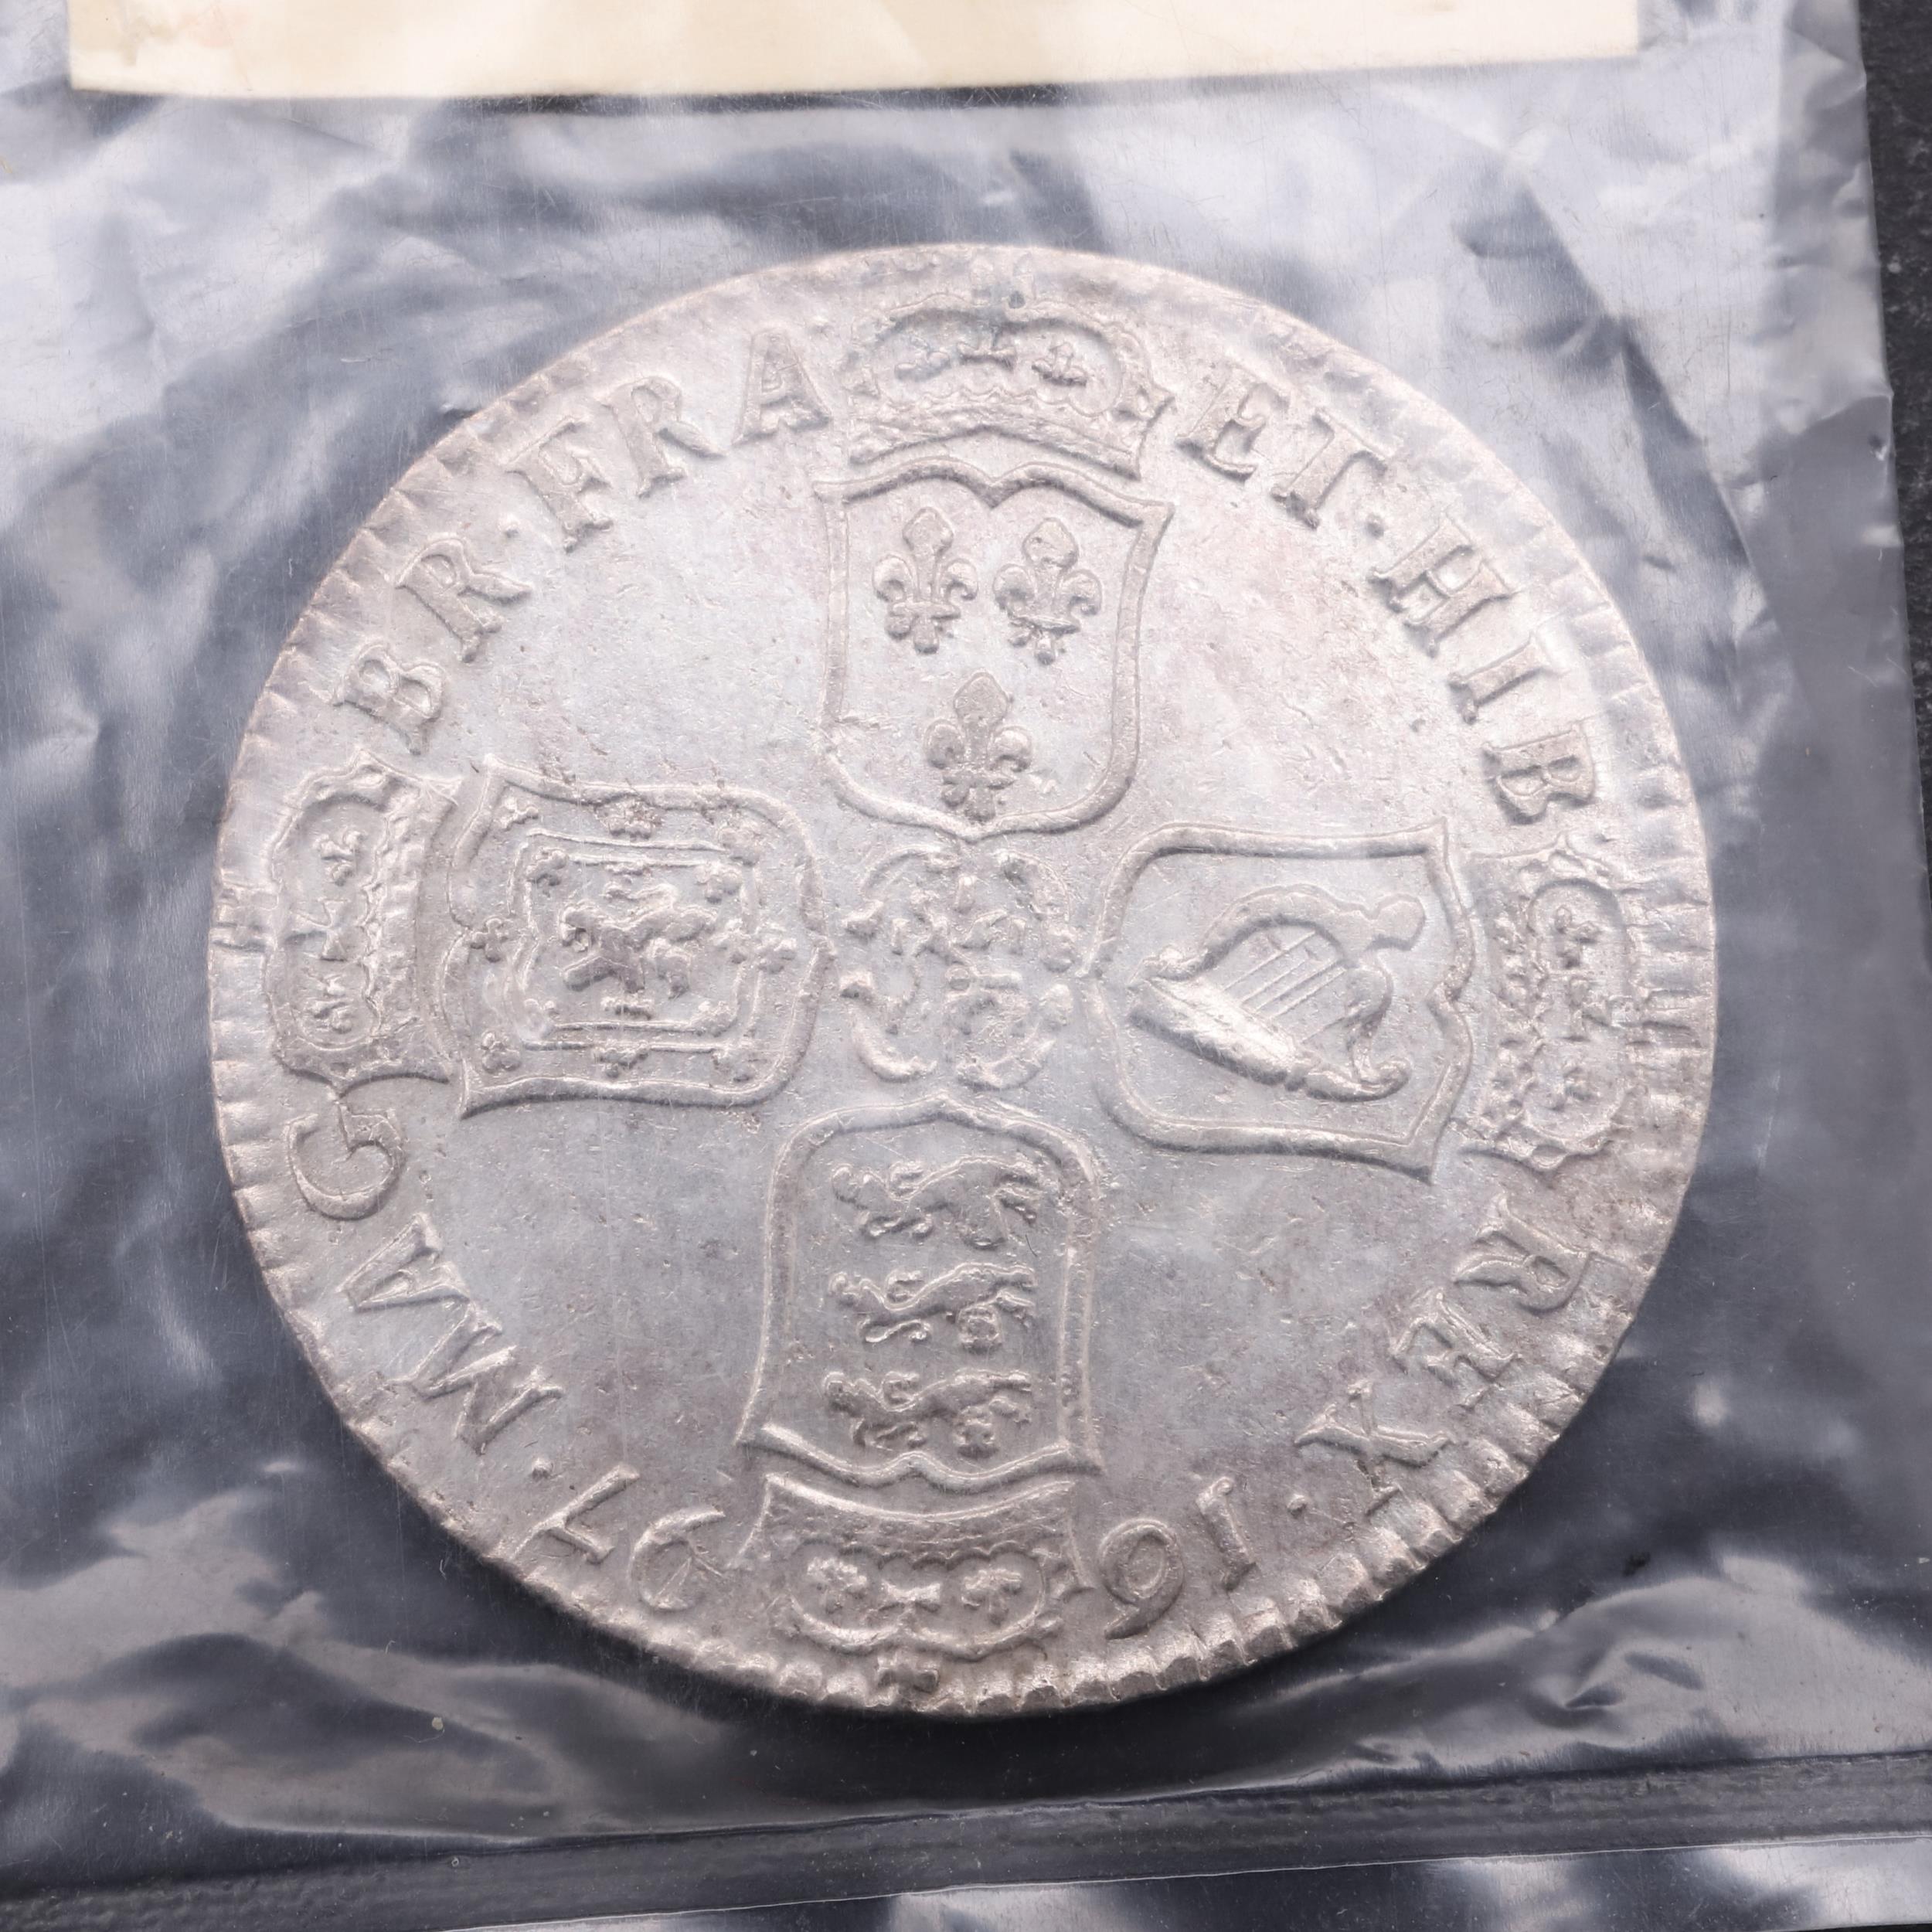 A WILLIAM III HALFCROWN, 1697, FROM THE WRECK OF THE ASSOCIATION. - Image 2 of 5